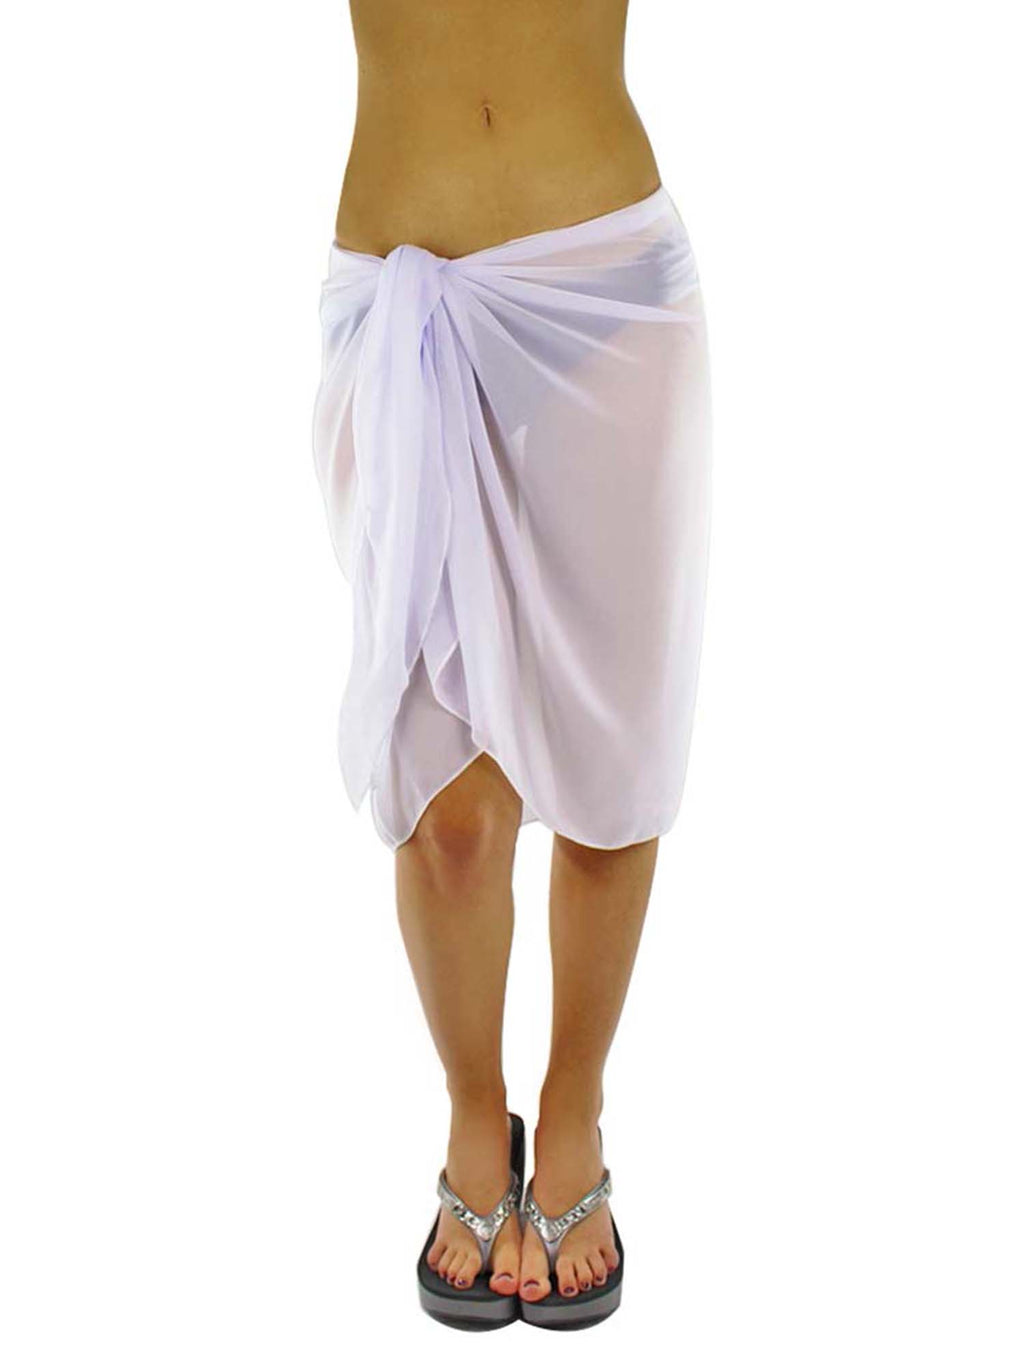 Sheer Knee Length Cover Up Sarong Wrap for Women